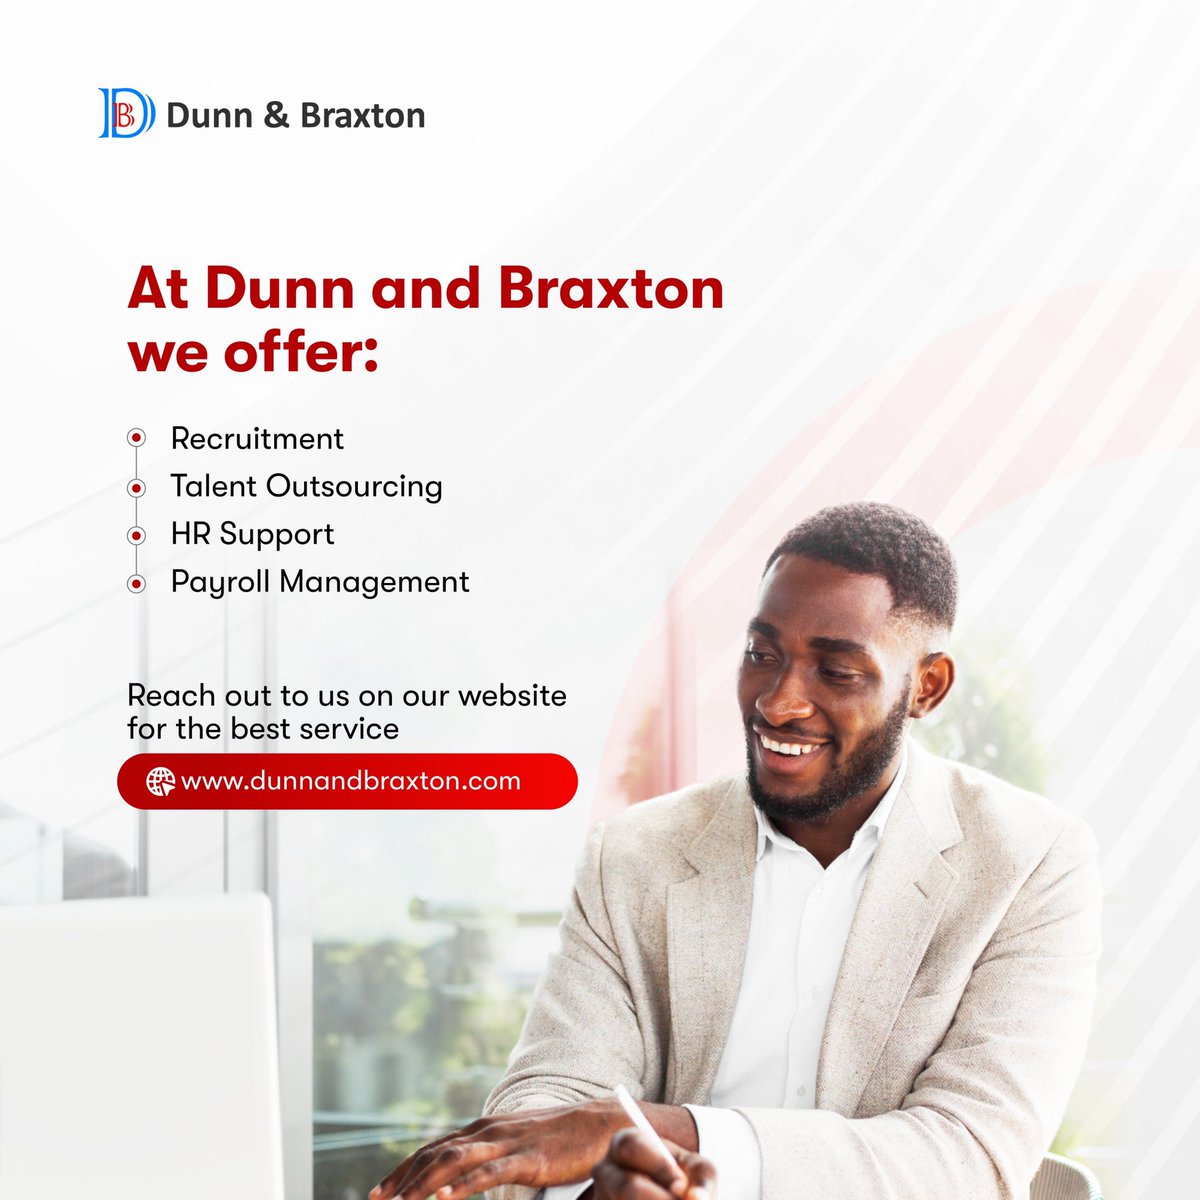 From recruitment to payroll management, we offer comprehensive HR solutions tailored to your needs. Reach out to us on our website for unparalleled service: dunnandbraxton.com 

#HRSolutions #Recruitment #TalentOutsourcing #PayrollManagement #DunnAndBraxton